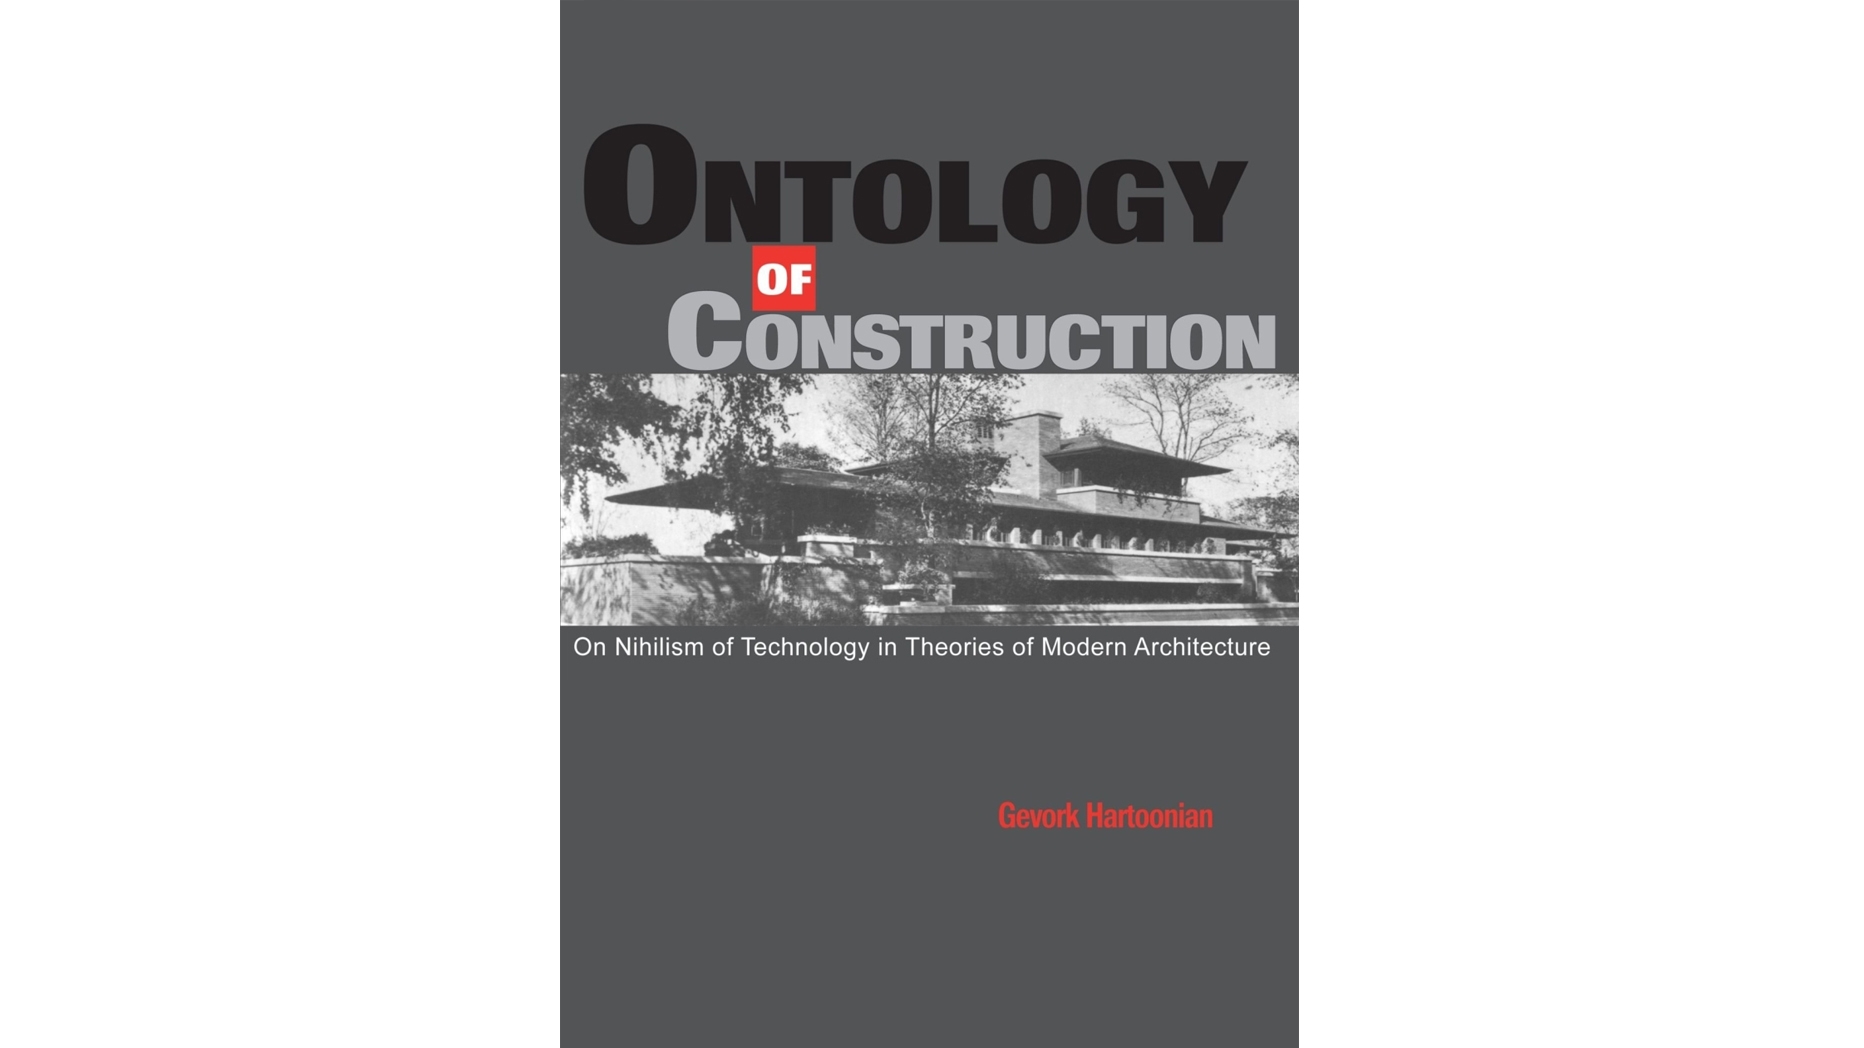 Ontology of Construction book cover